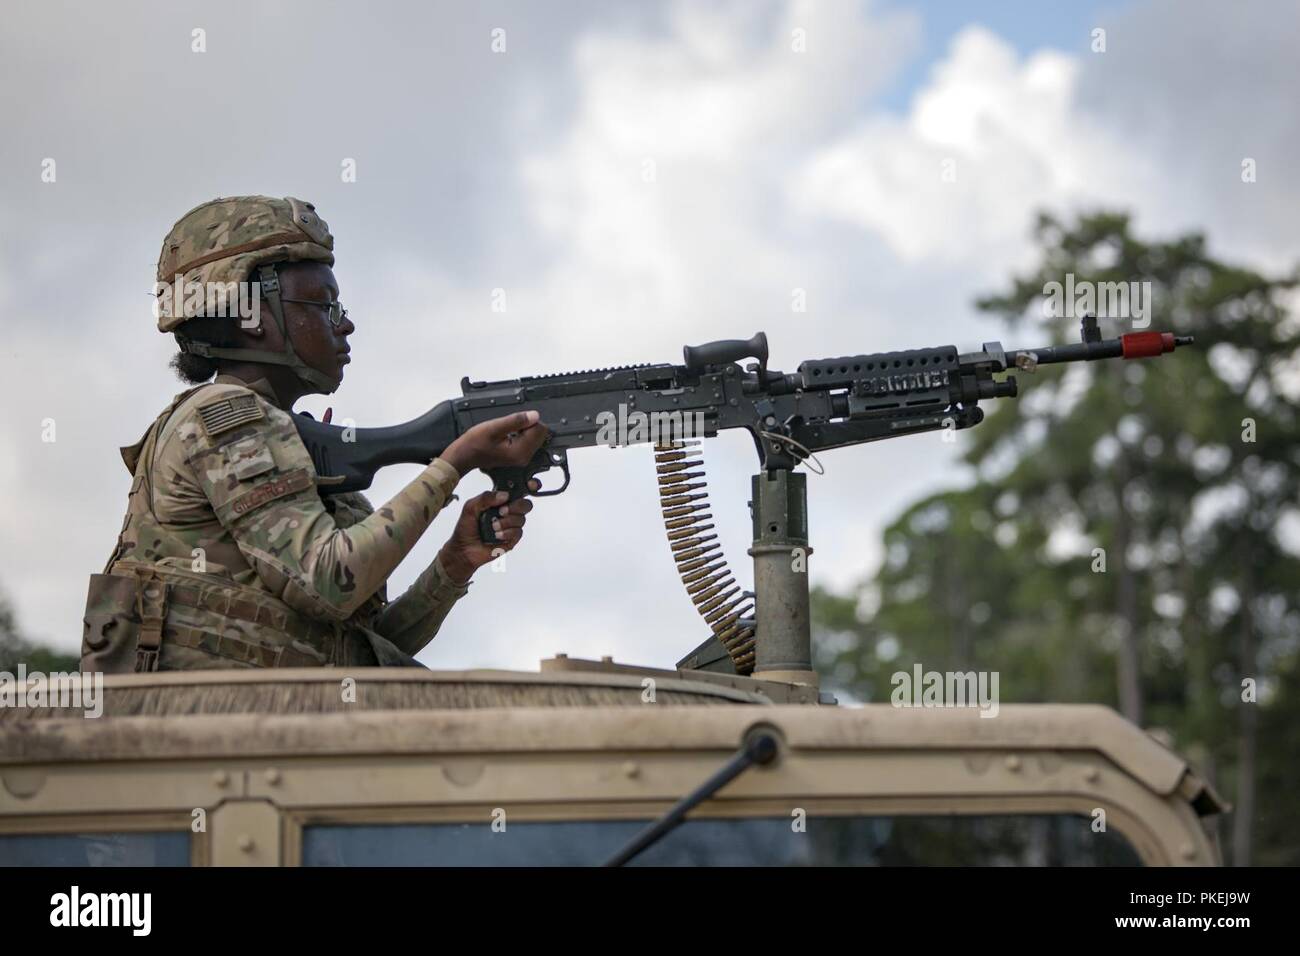 Airman 1st Class Zaire Gilchrist, 822d Base Defense Squadron (BDS) fireteam member, fires an M240B machine gun during a full mission profile assessment, July 24, 2018, at Moody Air Force Base, Ga. The ‘Safeside’ defenders evaluated their base defense tactics and procedures while performing patrols, tactical combat casualty care and countering improvised explosive devices for a mission readiness exercise. After successfully completing these events, the defenders are eligible to earn their Global Response Force status, which certifies the unit to deploy worldwide. Stock Photo